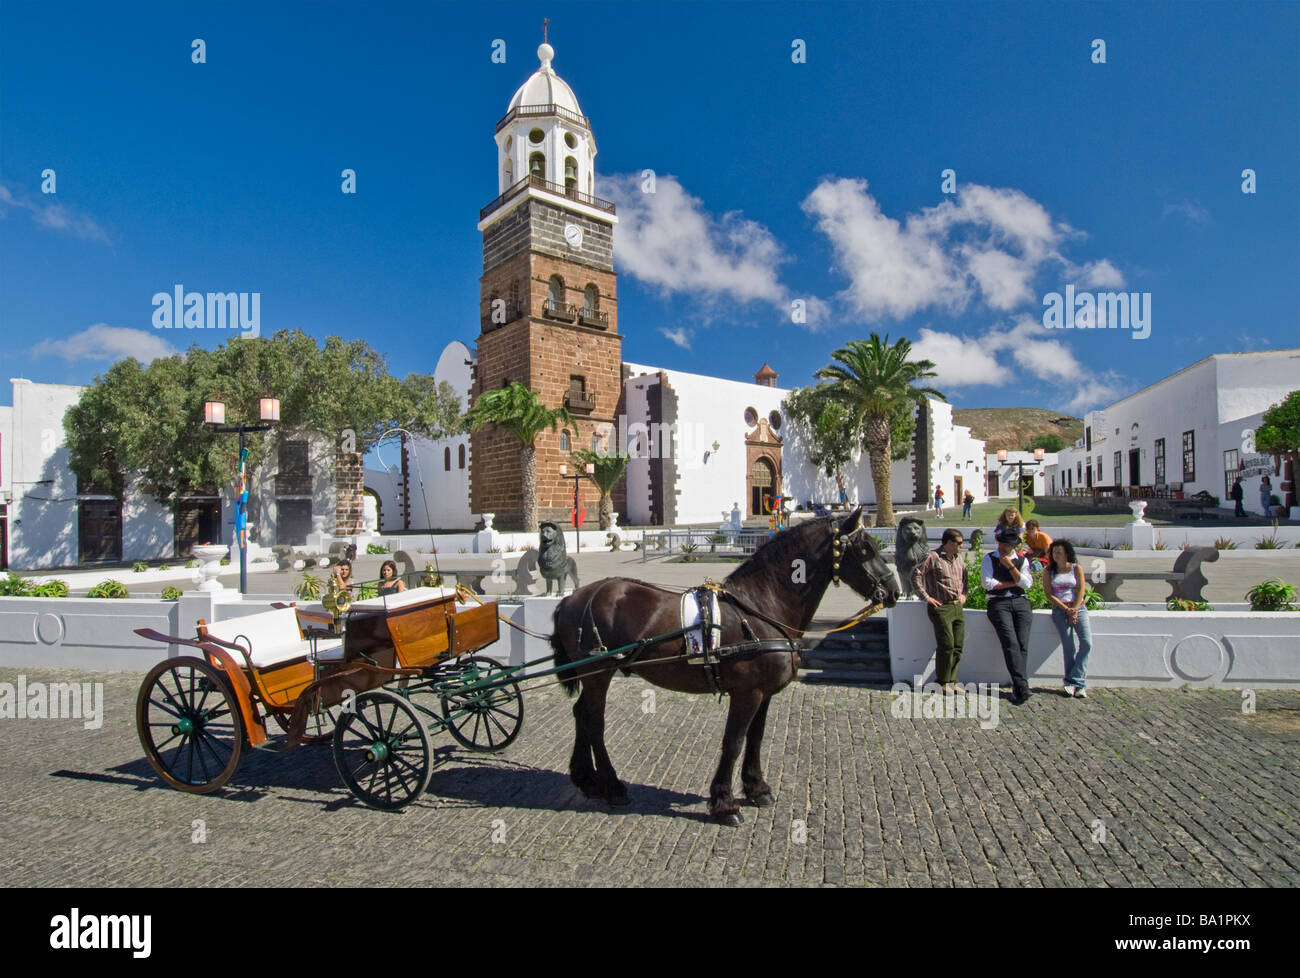 Lanzarote Teguise old Town Typical traditional horse and carriage ride standing in the main square of old Teguise town Lanzarote Canary Islands Spain Stock Photo